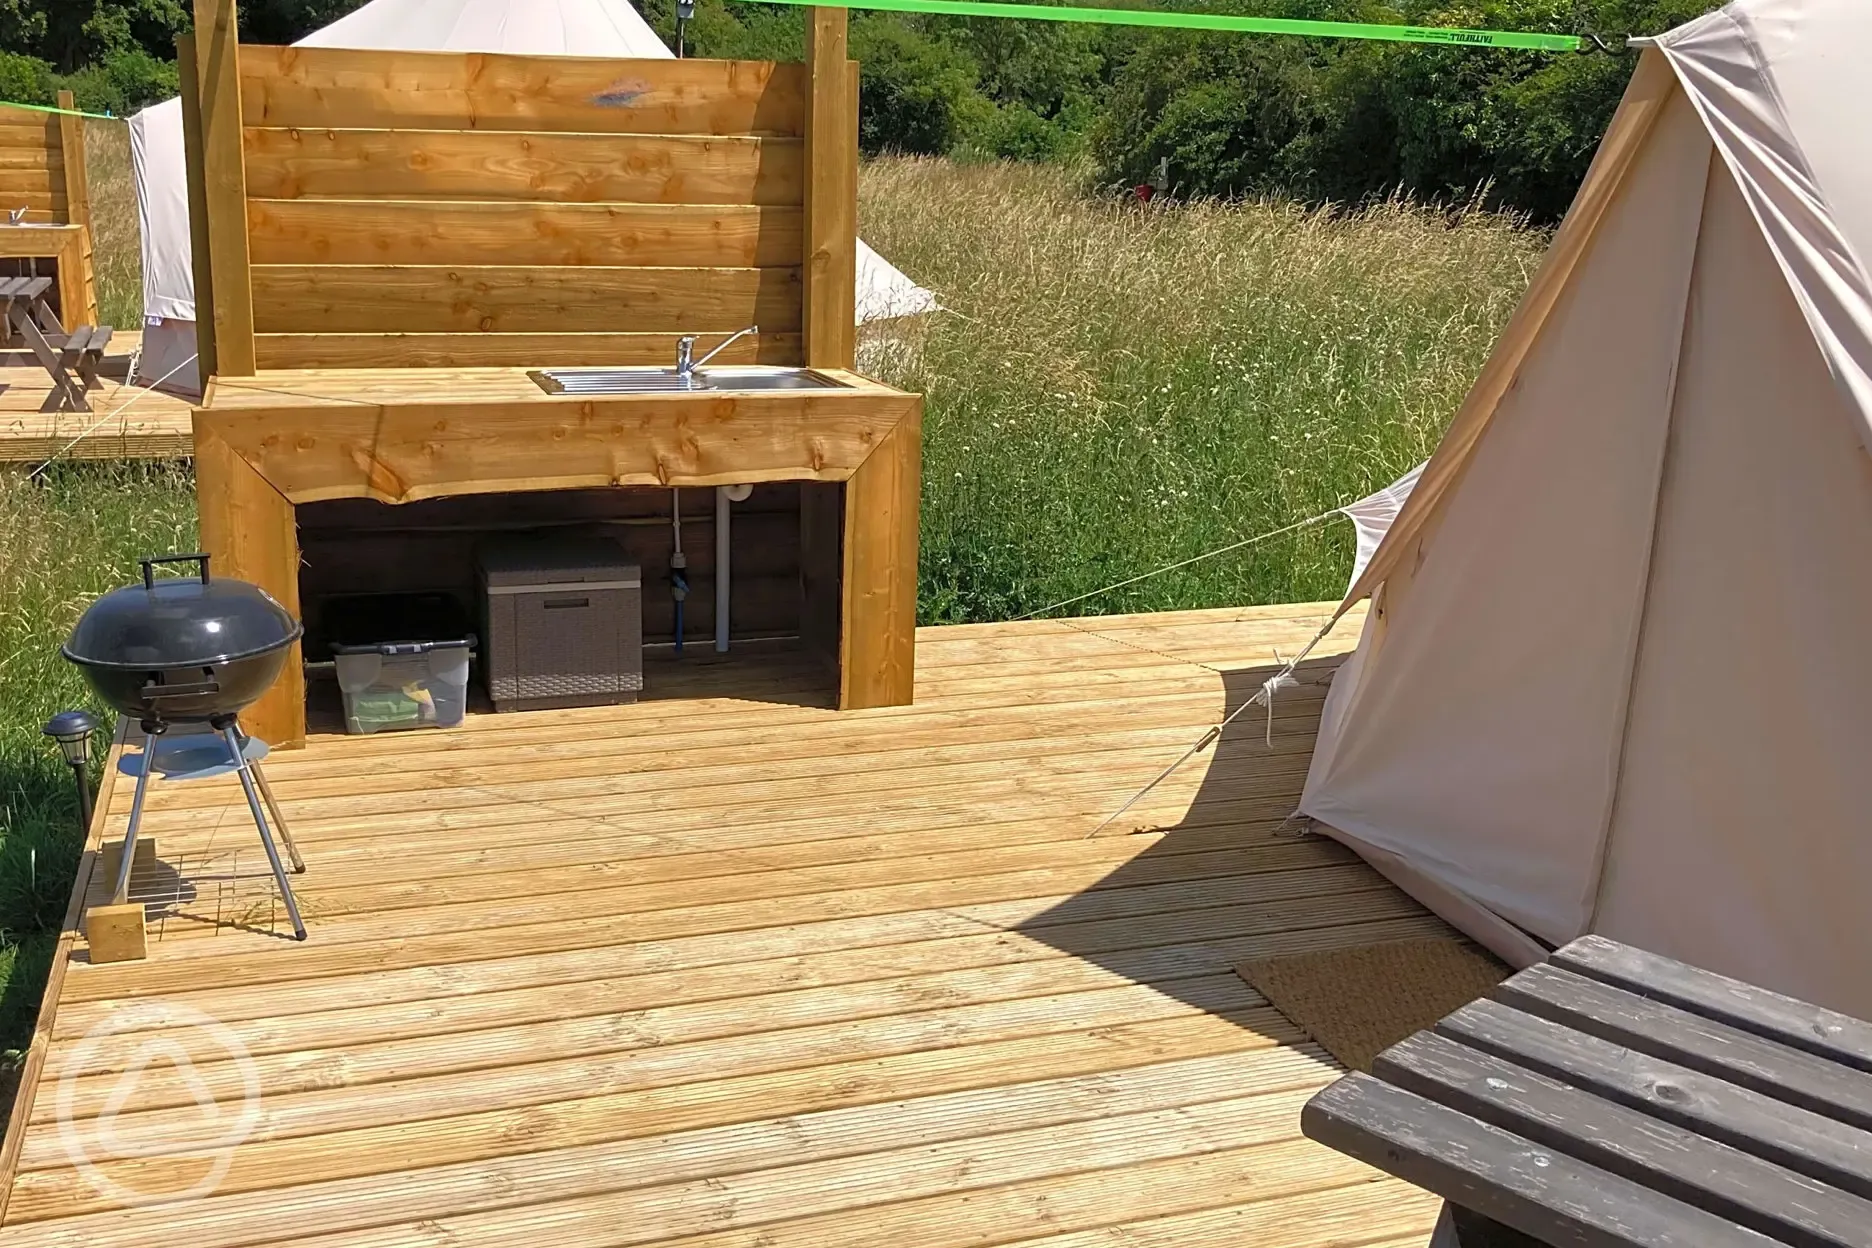 Bell tent decking with BBQ and washing up area